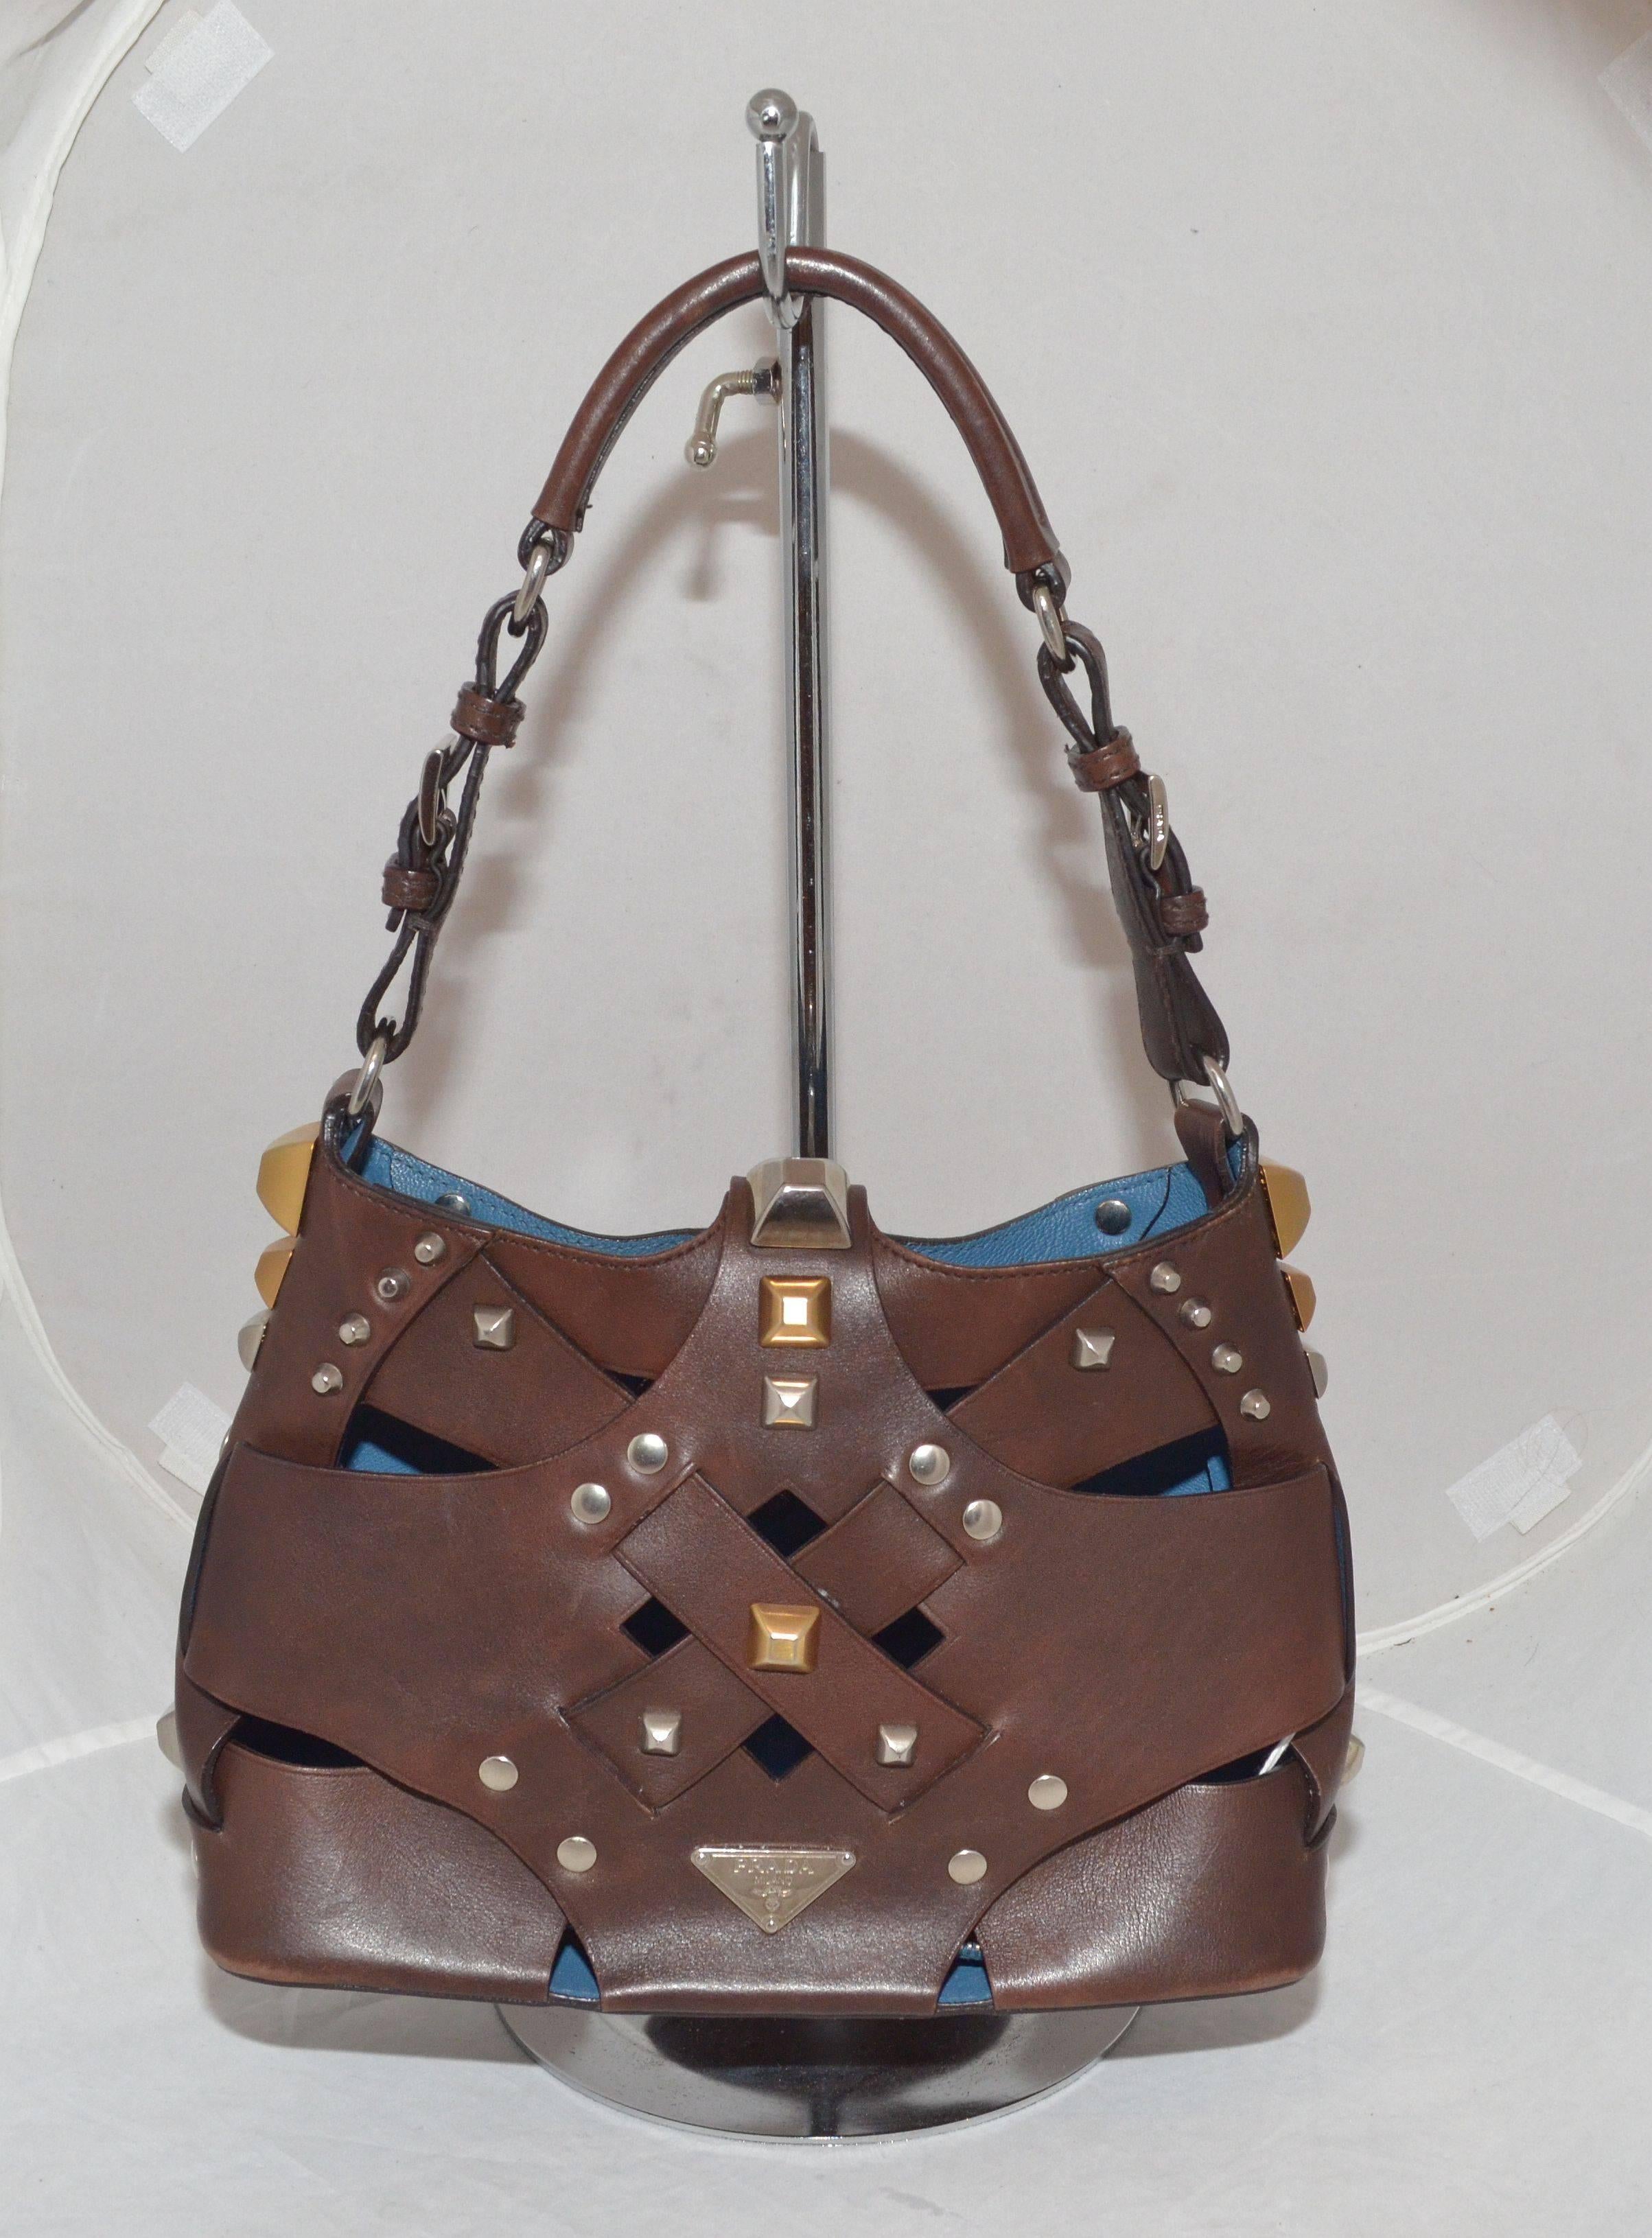 Prada Woven Leather Studded Cutout Mini Handbag

Prada handbag featured in a dark brown leather with gold and silver-tone studding, flap strap with a magnetic closure. There is a decorative buckle on the handle, protective feet at the base, and